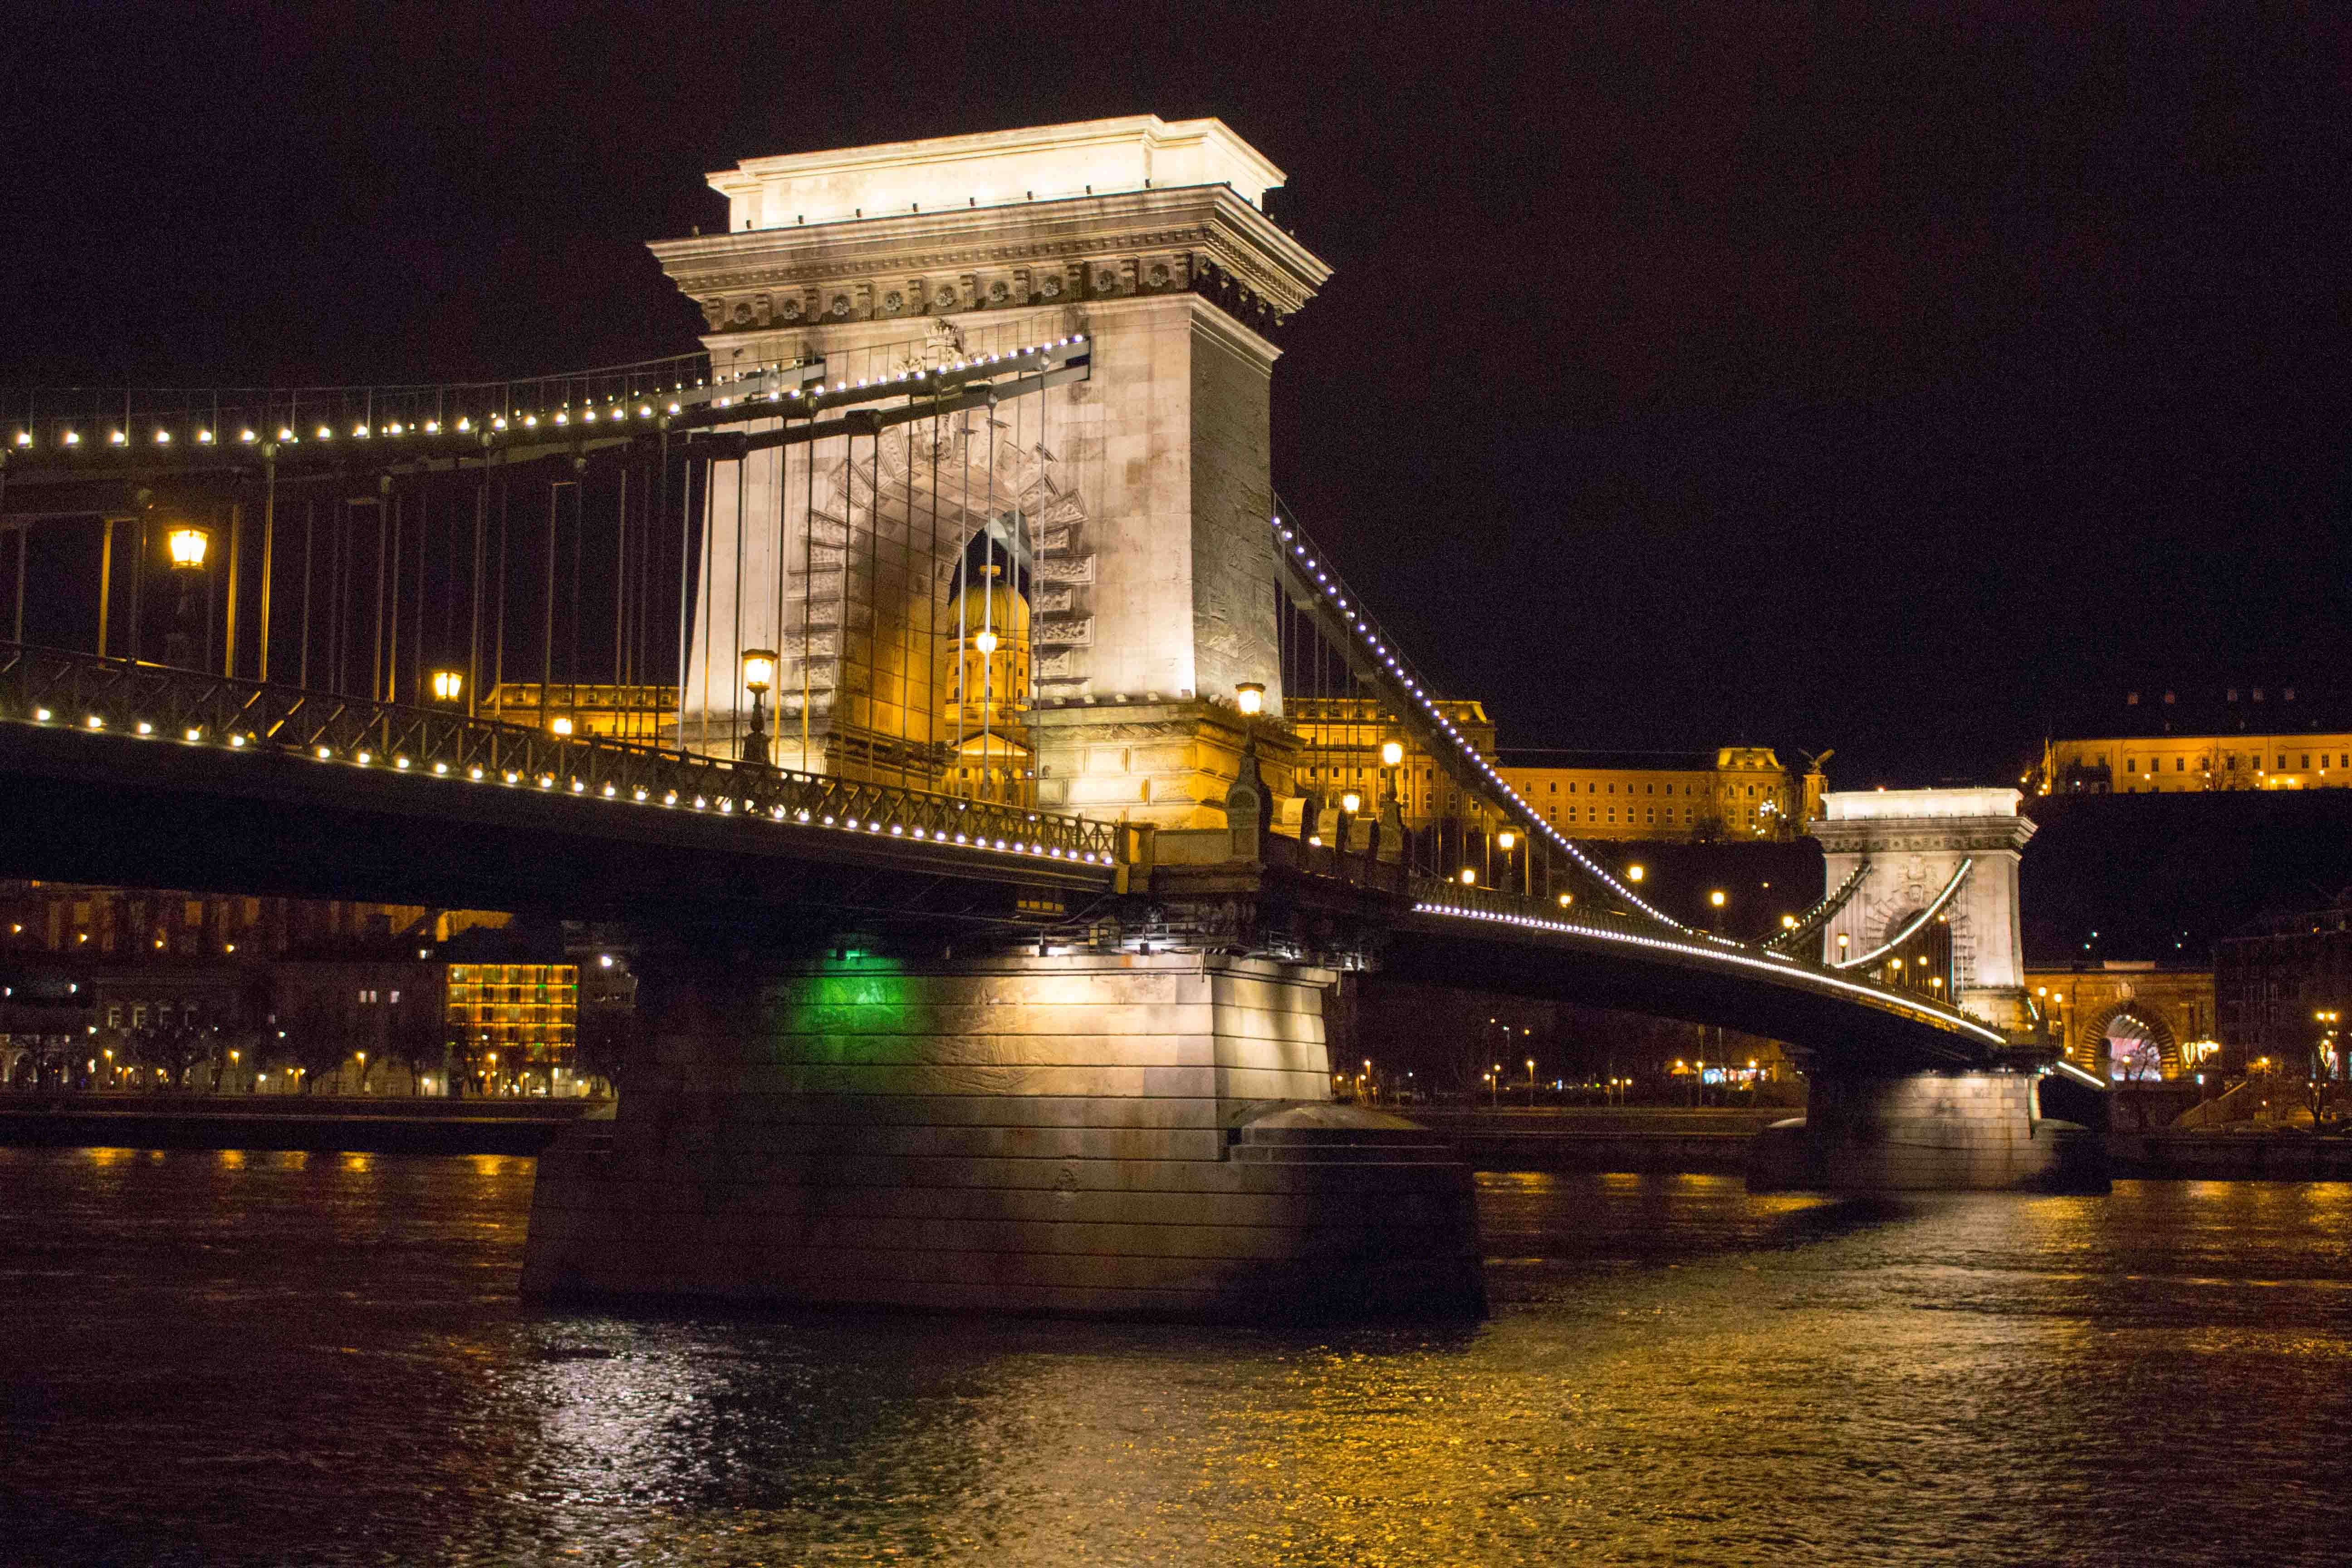 Visiter Budapest by Night: Le Chain Bridge